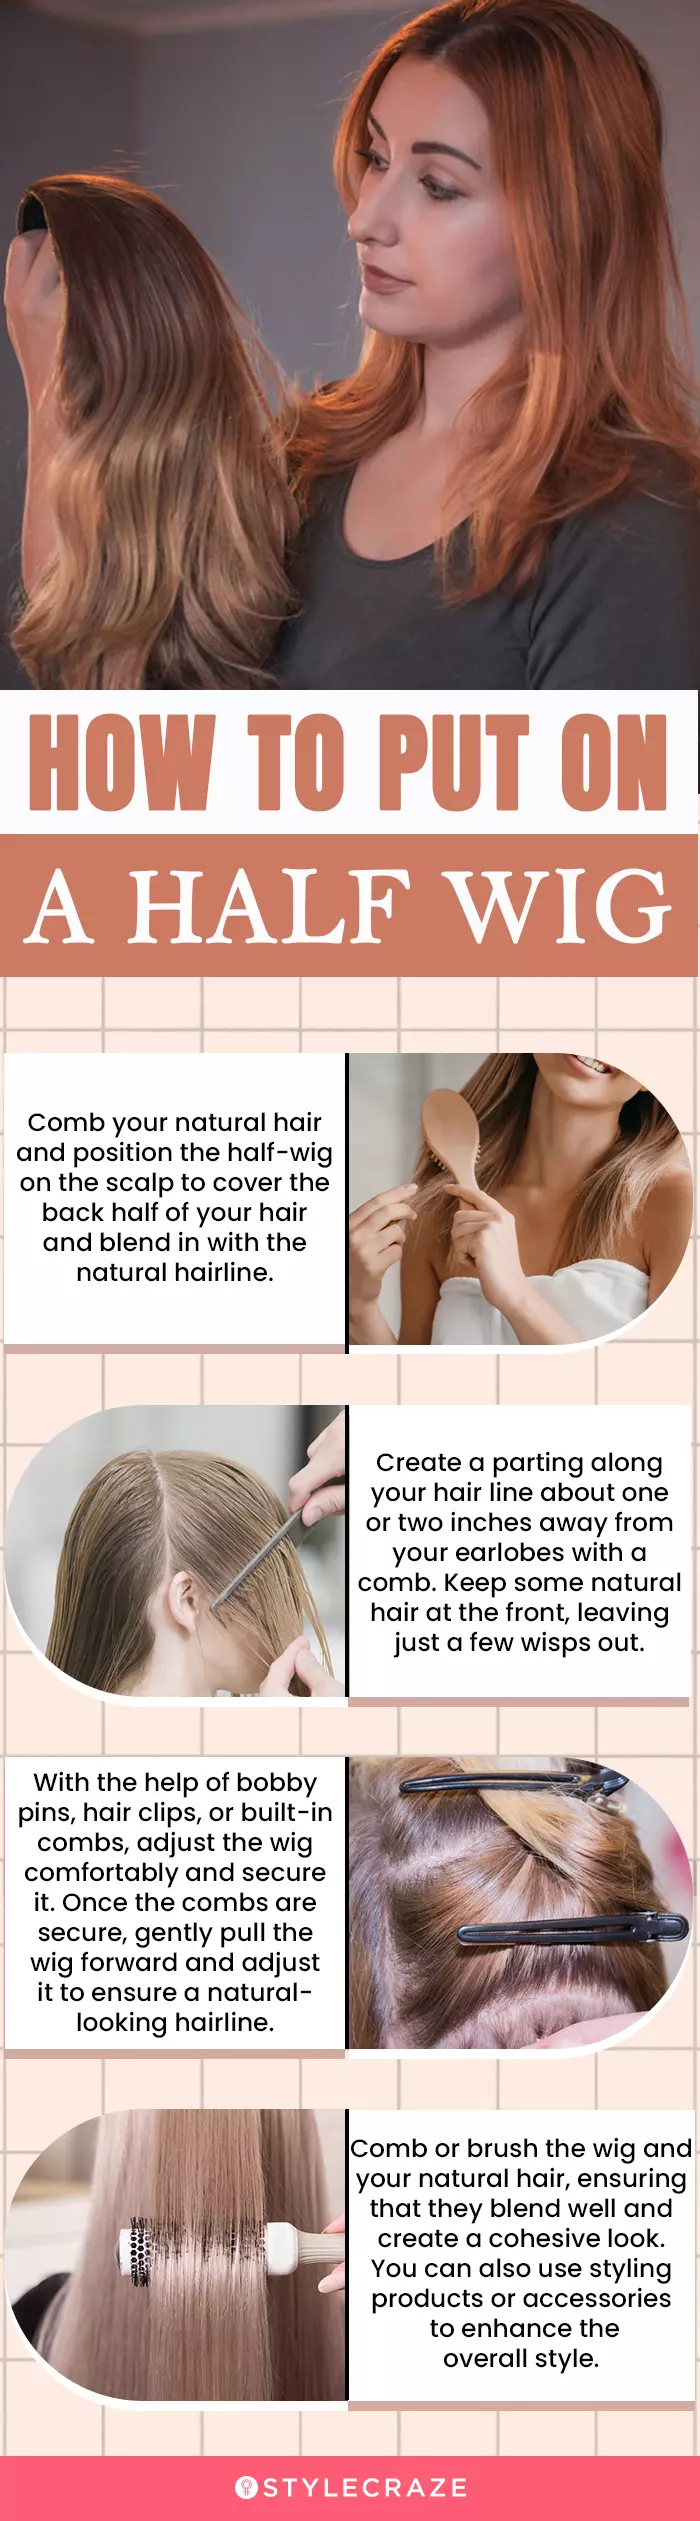 How To Put On A Half Wig (infographic)